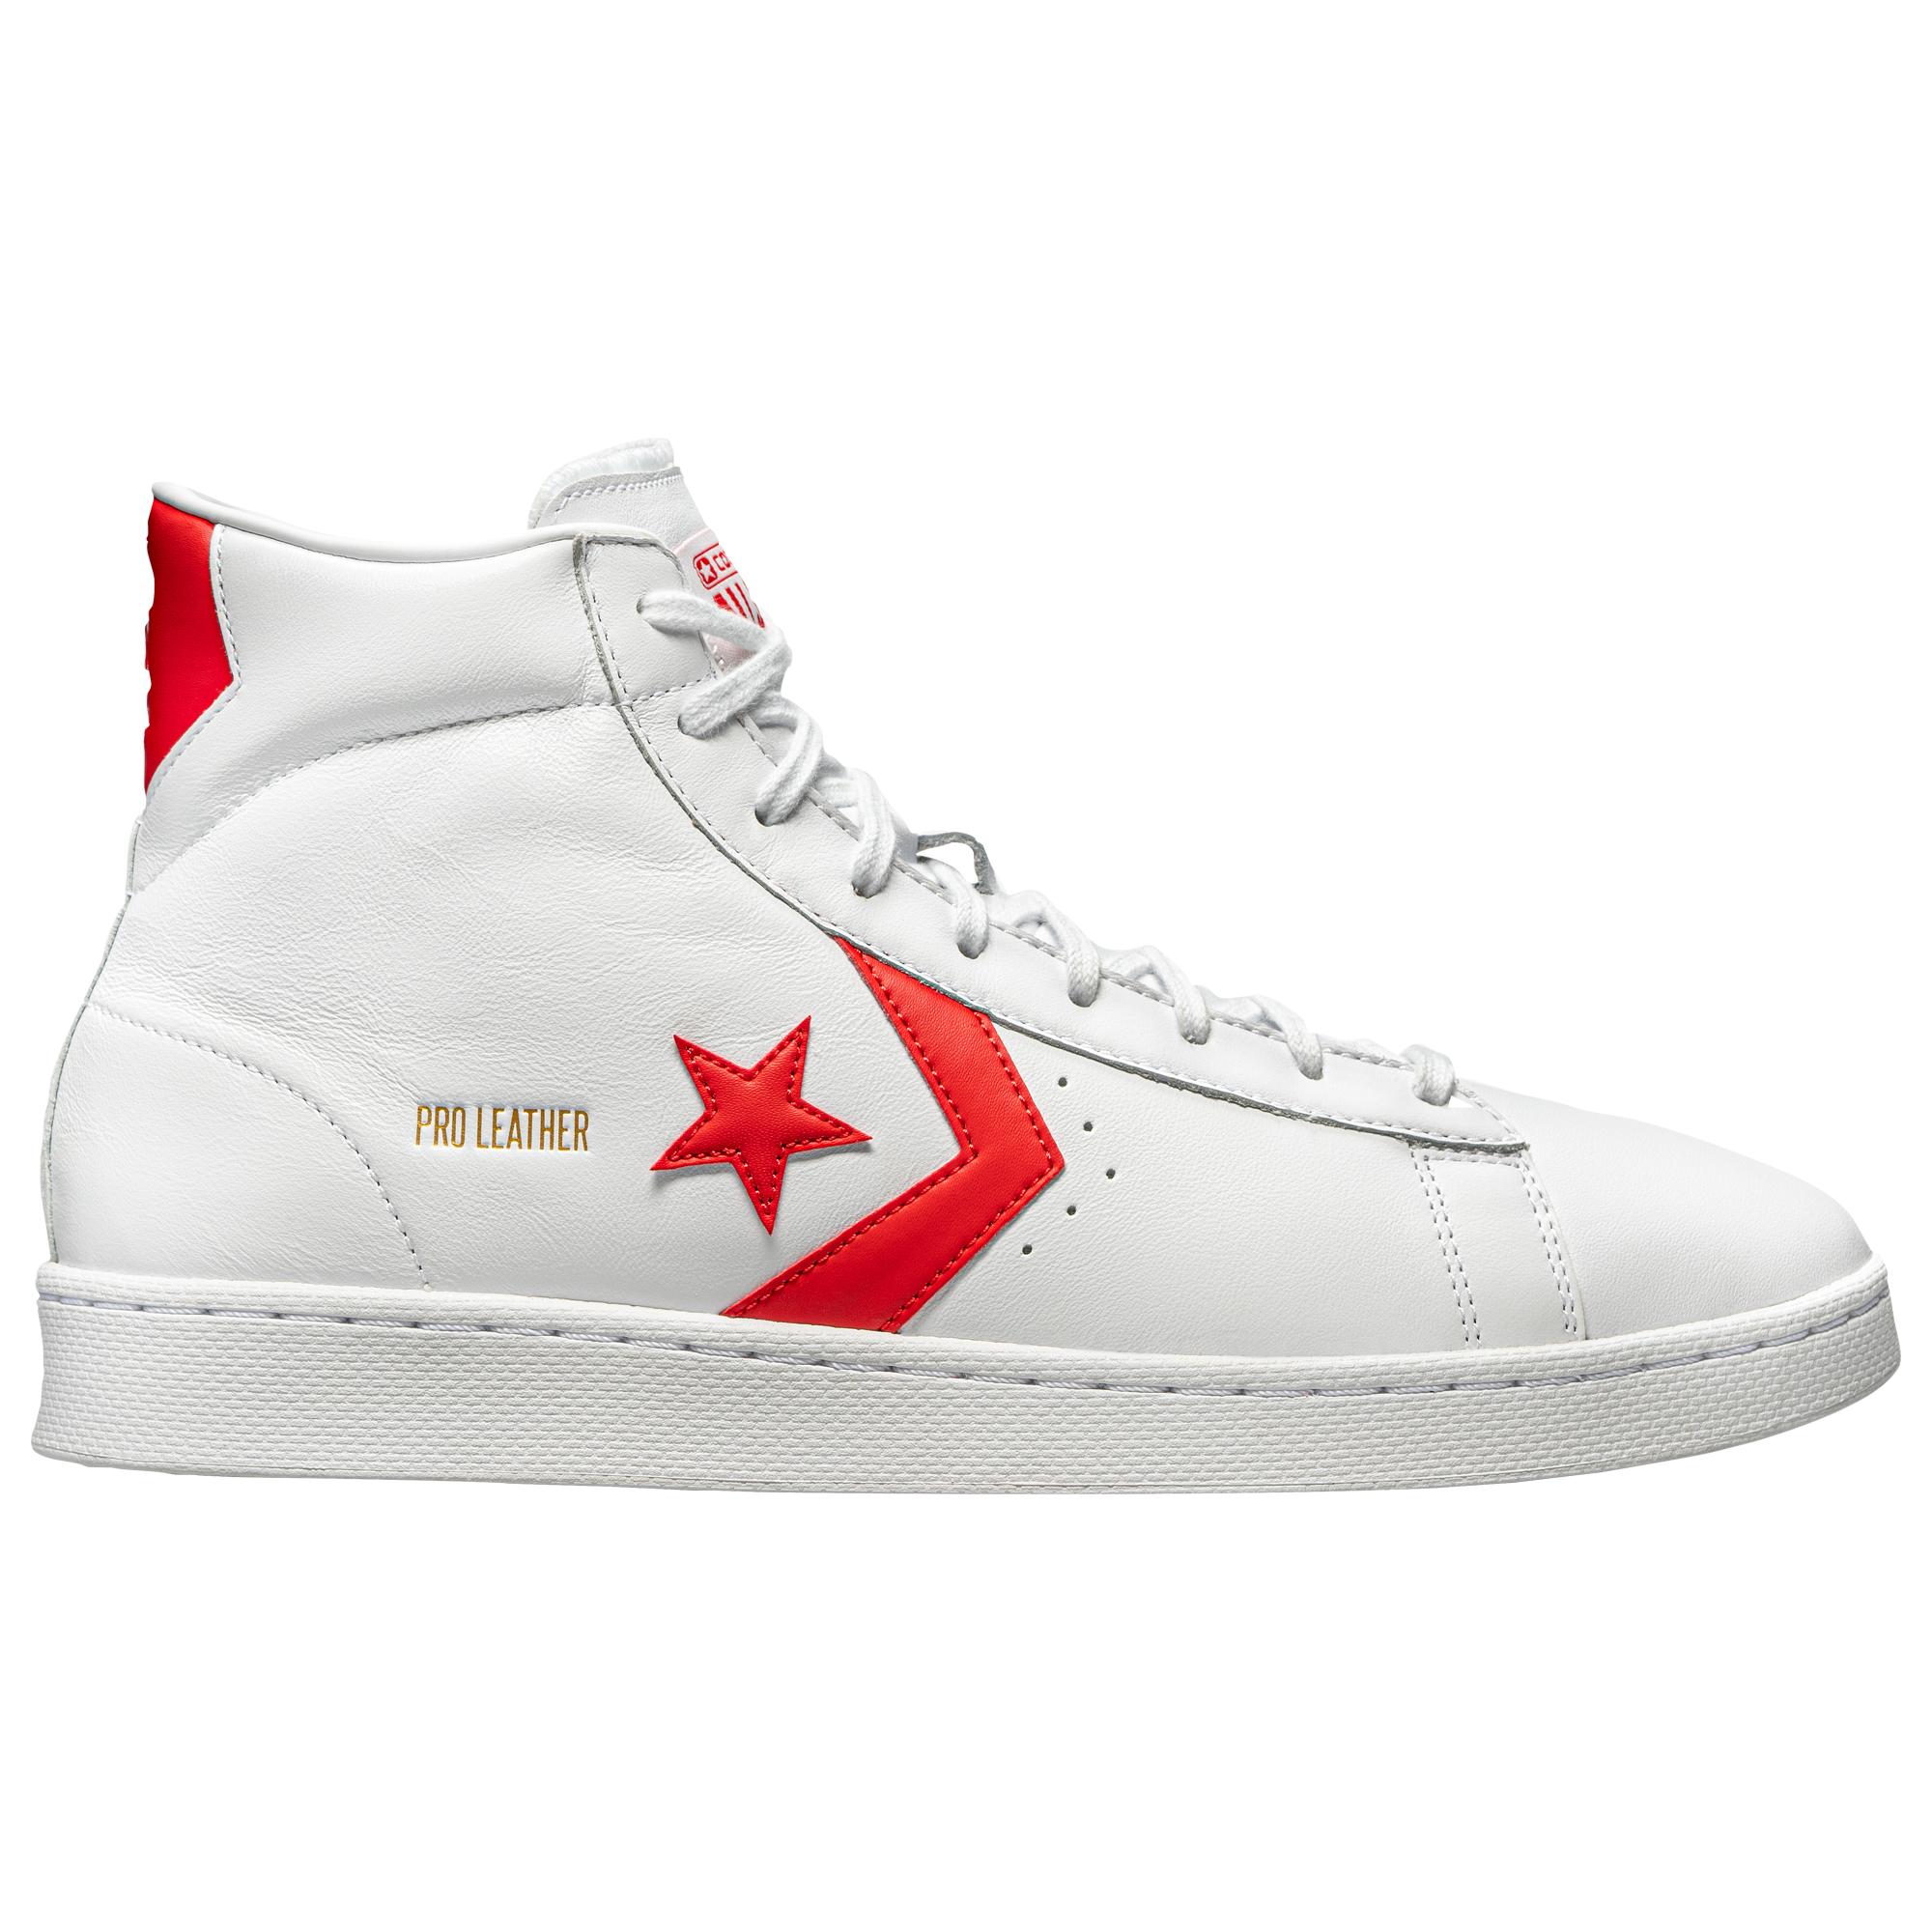 Converse Pro Leather Mid - Basketball Shoes in White/Red (White) for ...